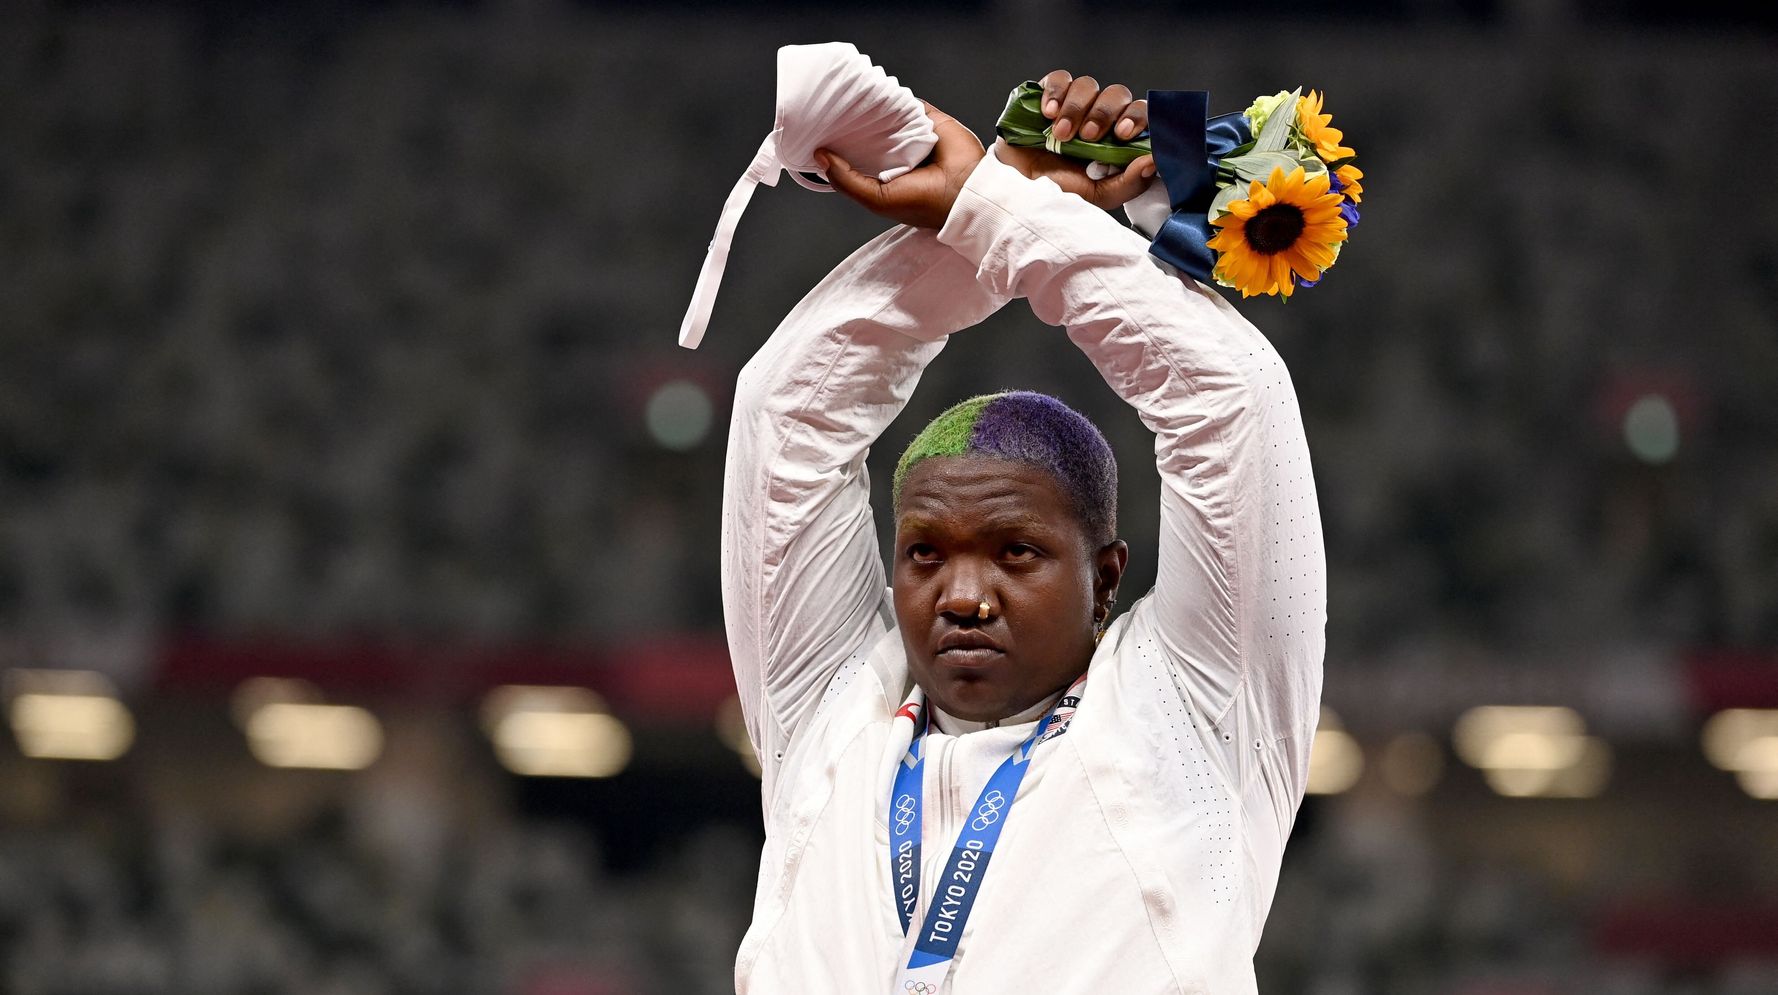 Shot-Putter Raven Saunders Defends ‘X’ Gesture, In Honor Of All Who Are Oppressed